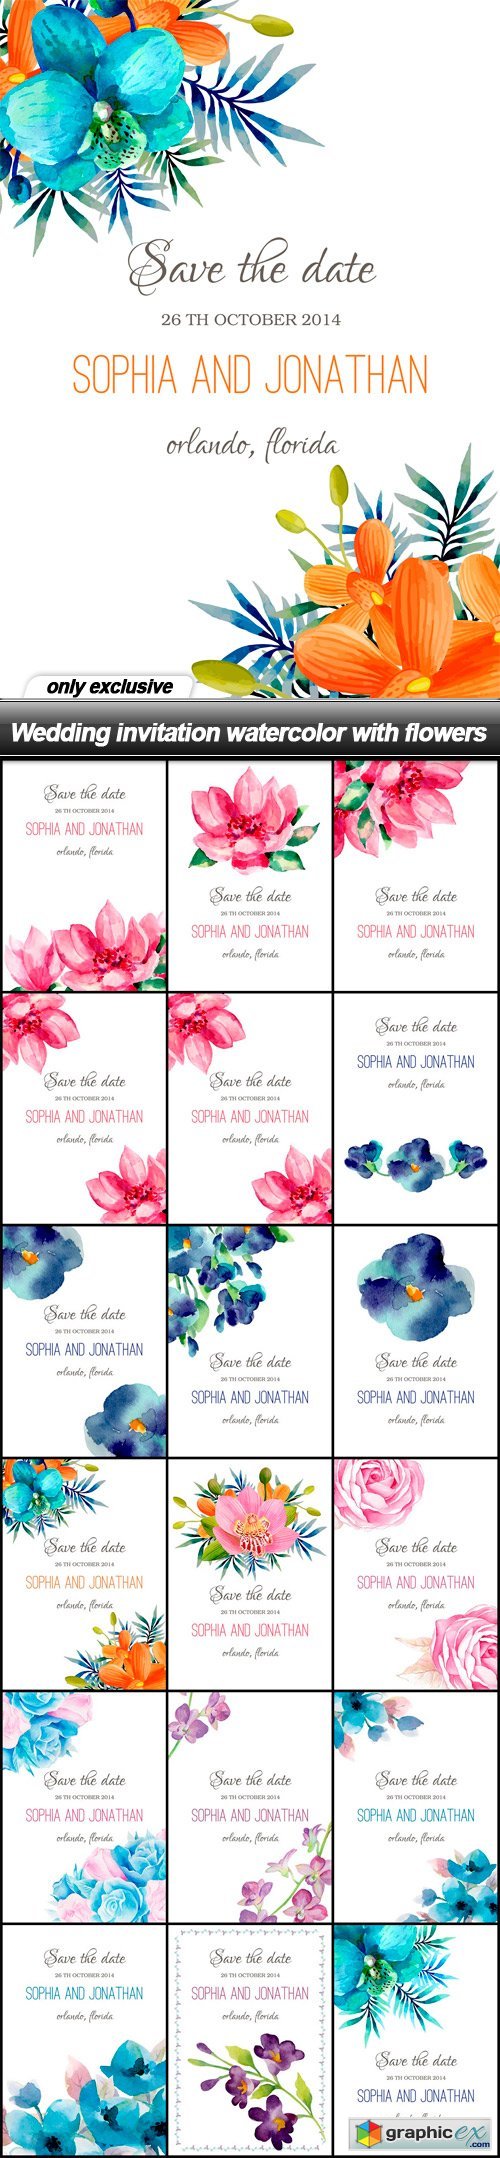 Wedding invitation watercolor with flowers - 18 EPS